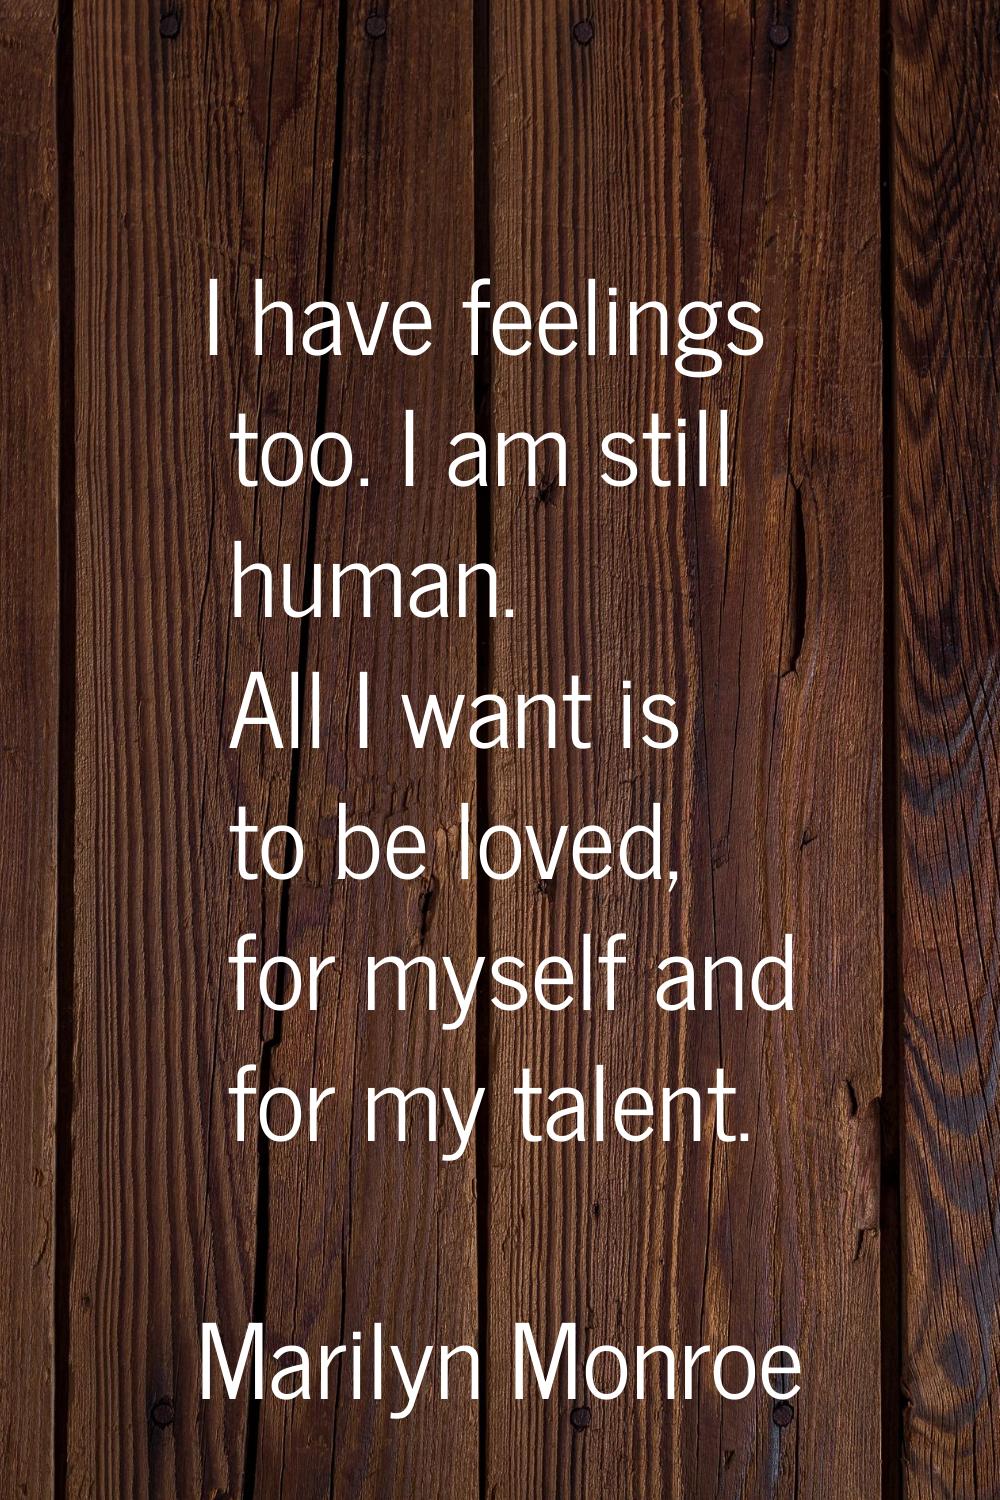 I have feelings too. I am still human. All I want is to be loved, for myself and for my talent.